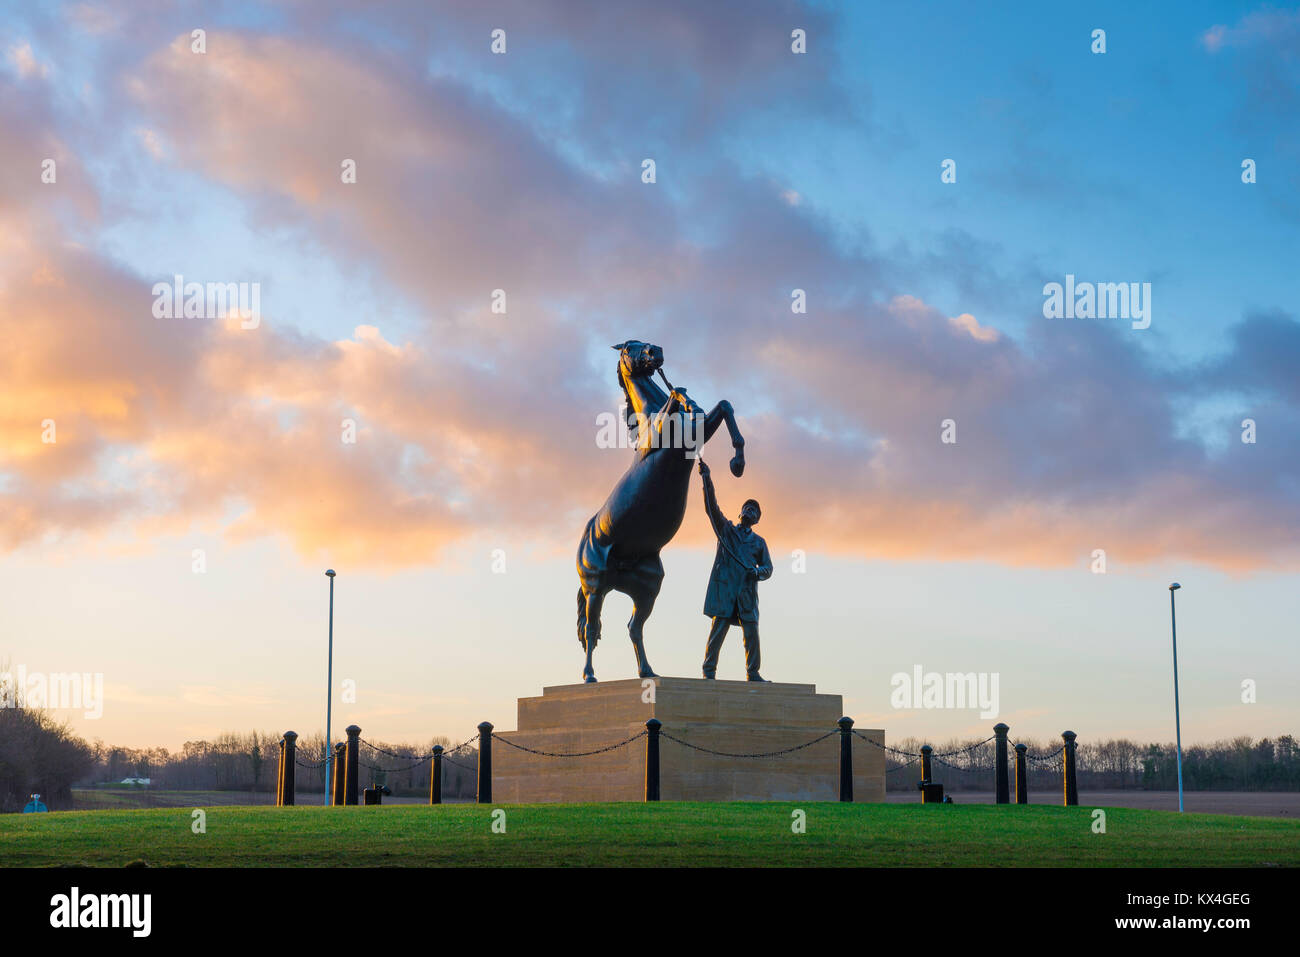 Newmarket Suffolk UK, view of the Newmarket Stallion statue, a landmark sited near the entrance to the famous Suffolk racecourse, UK. Stock Photo